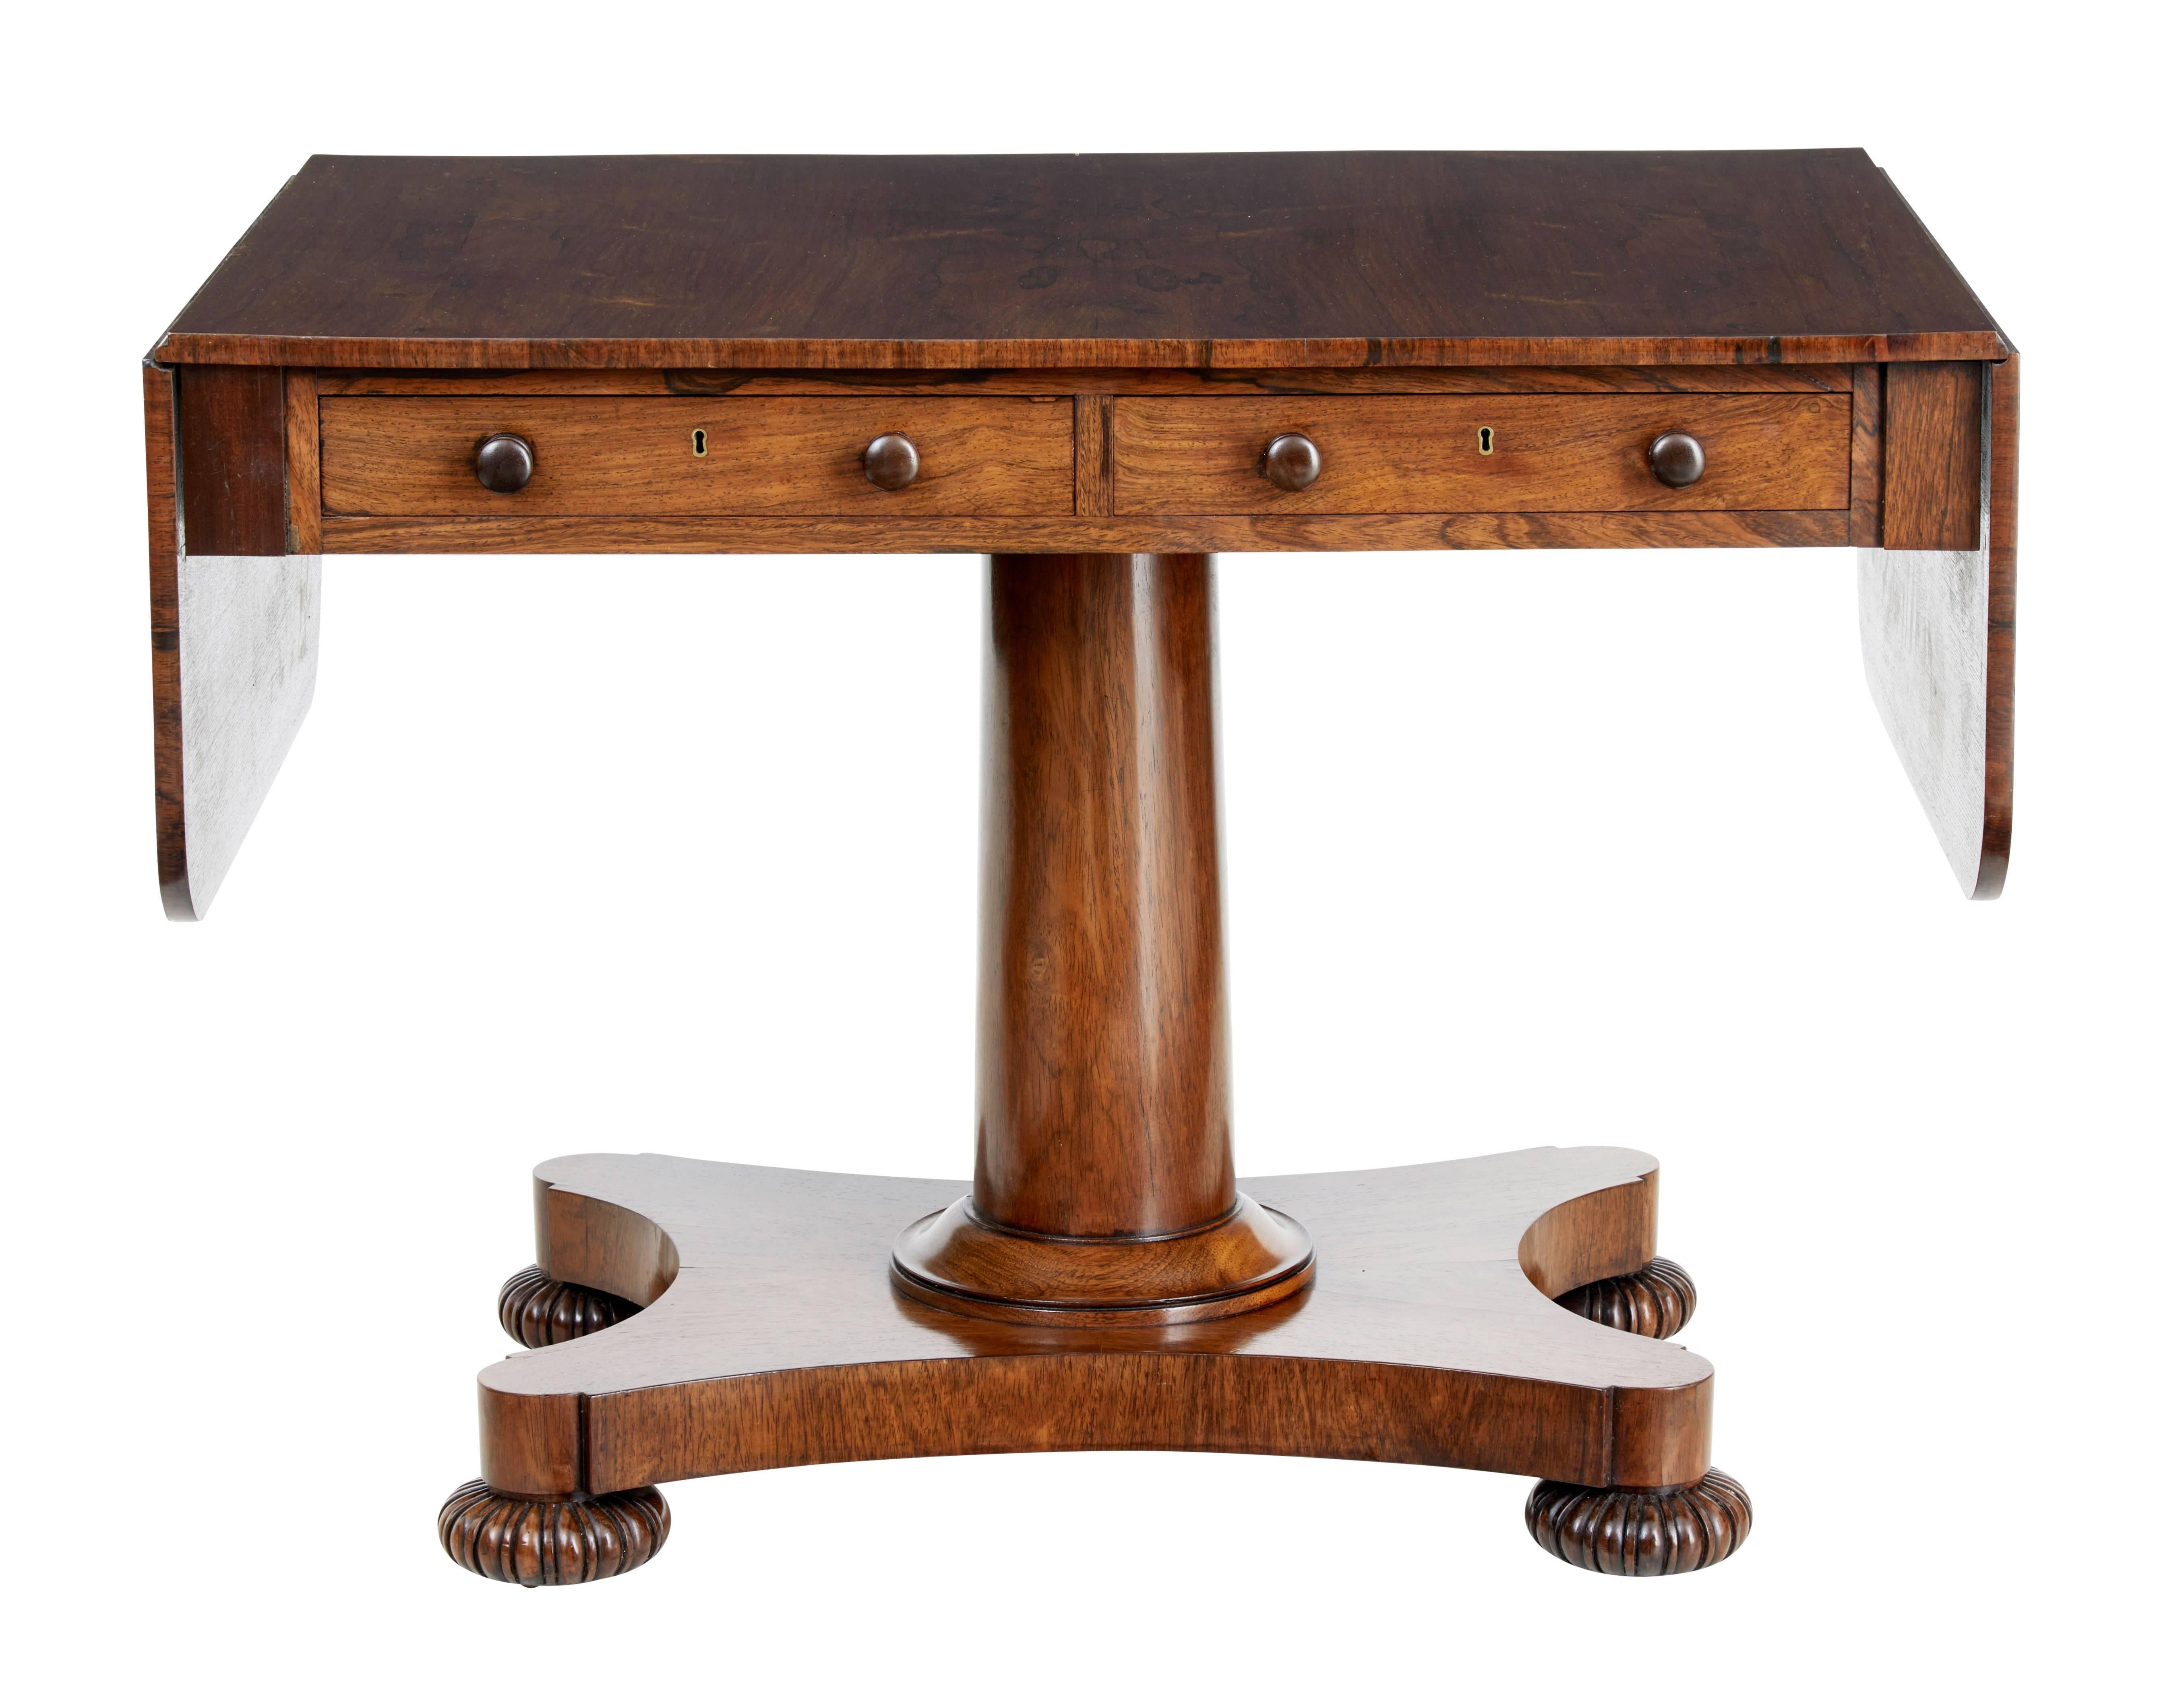 Fine quality Regency period sofa table, circa 1820.

We are pleased to showcase this sofa table of ideal proportions.

Stunning Palisander veneers. Two drawers to the front.

Standing on stem and quadriform base, shaped bun feet and original